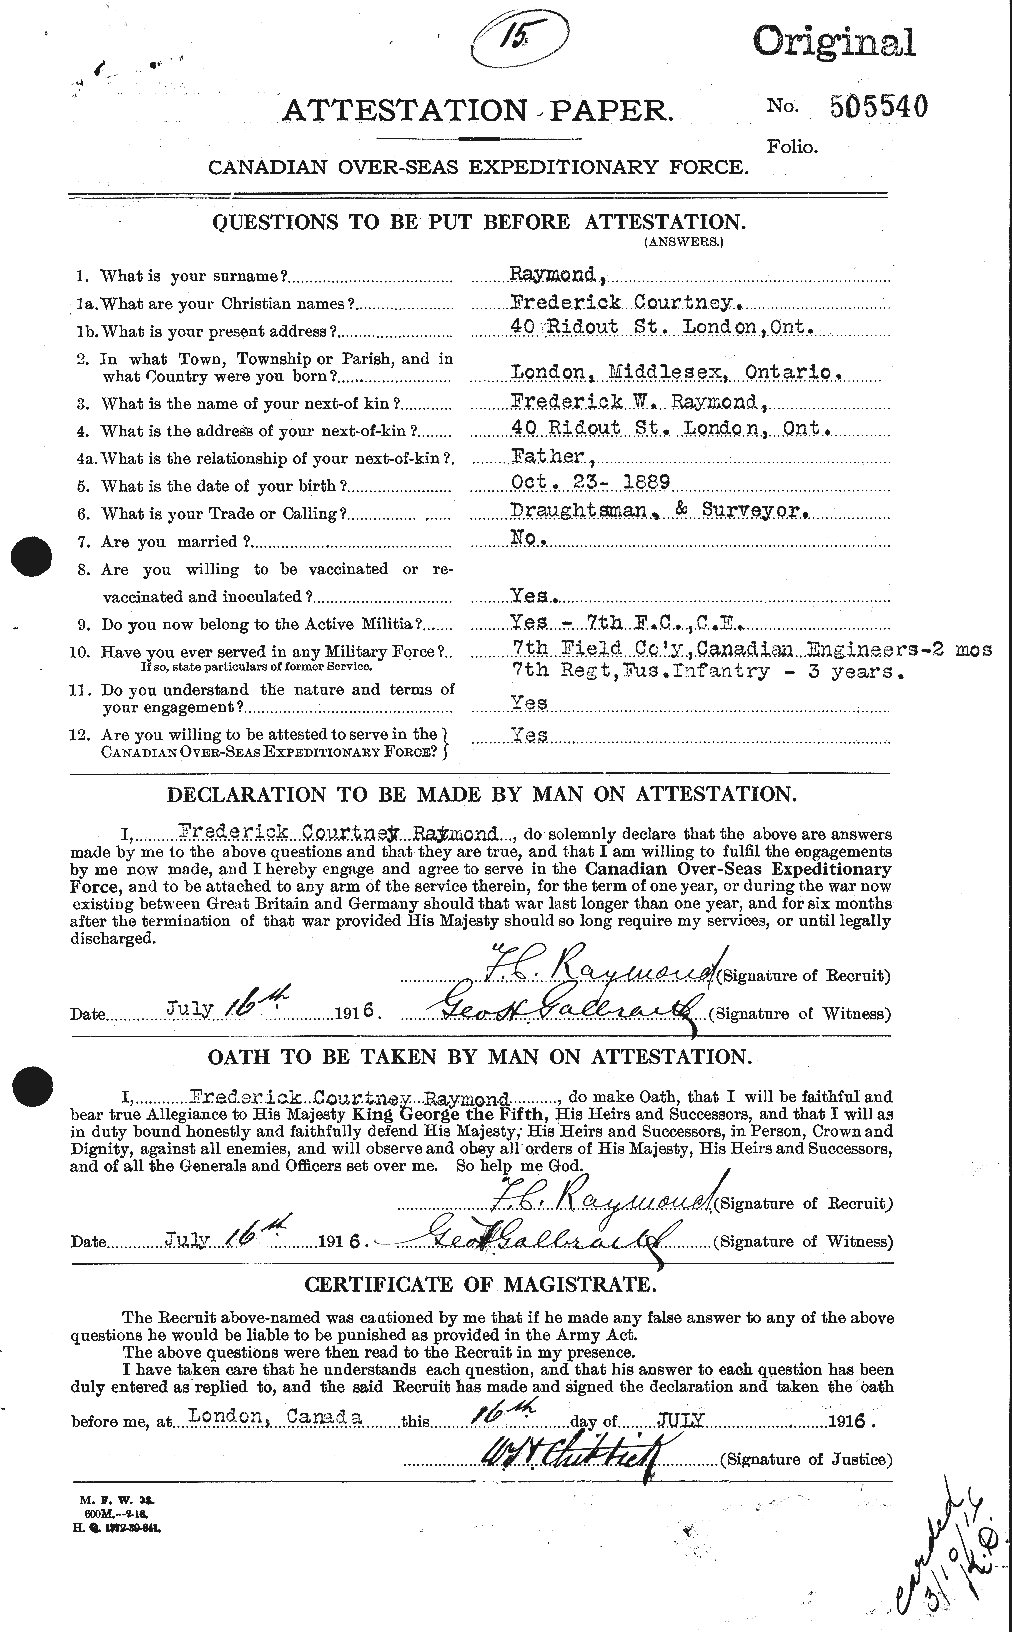 Personnel Records of the First World War - CEF 595334a